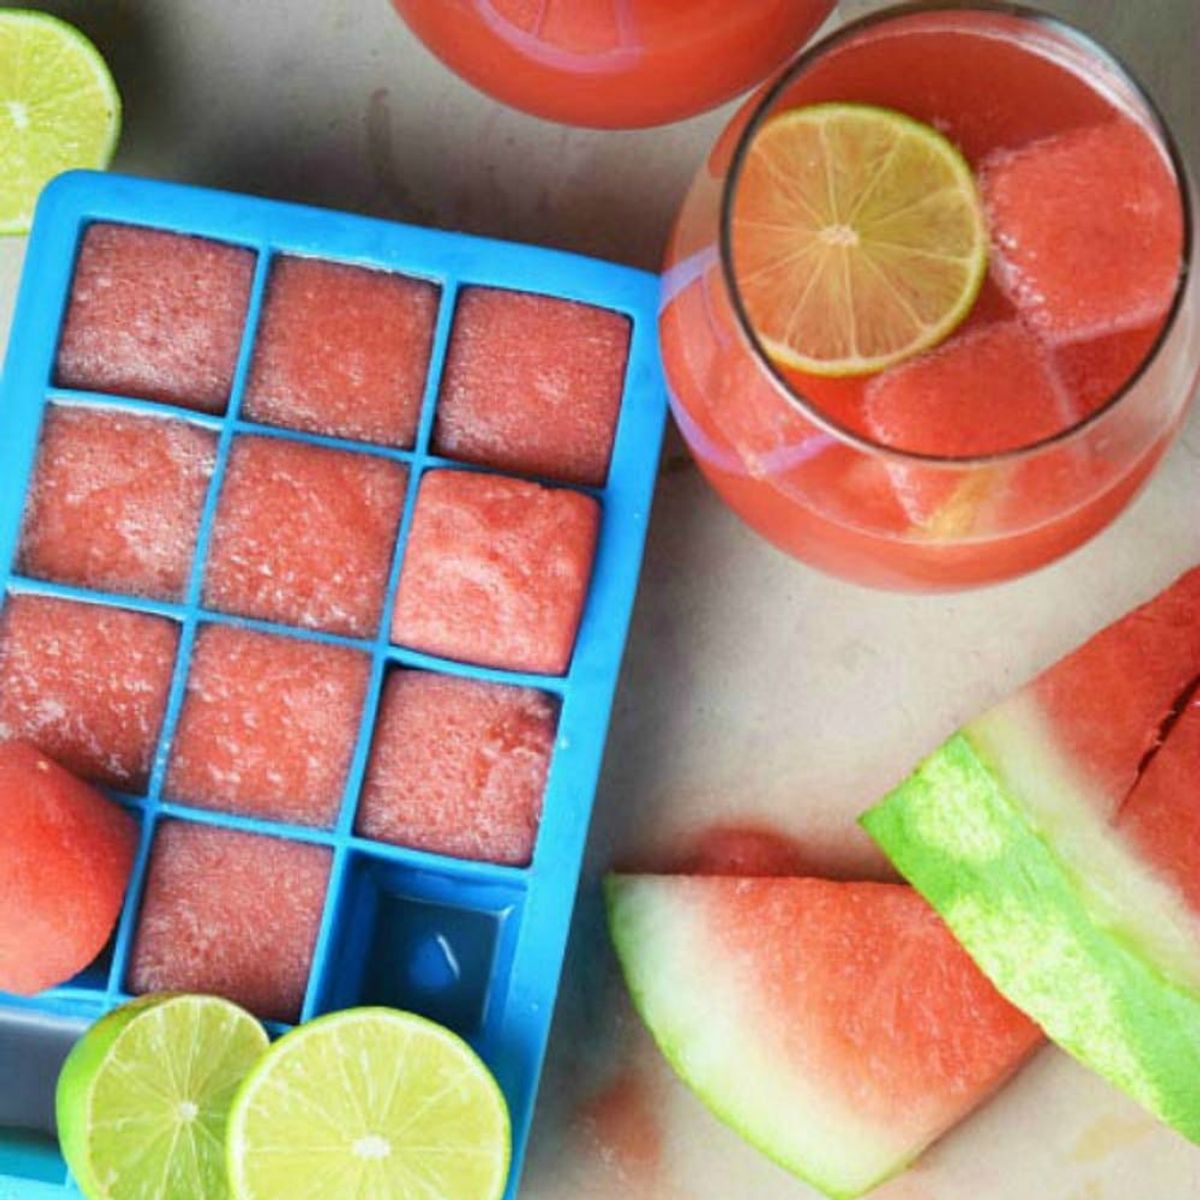 Watermelon Ice Cubes Are the Chillest Food Trend You’ll See This Summer